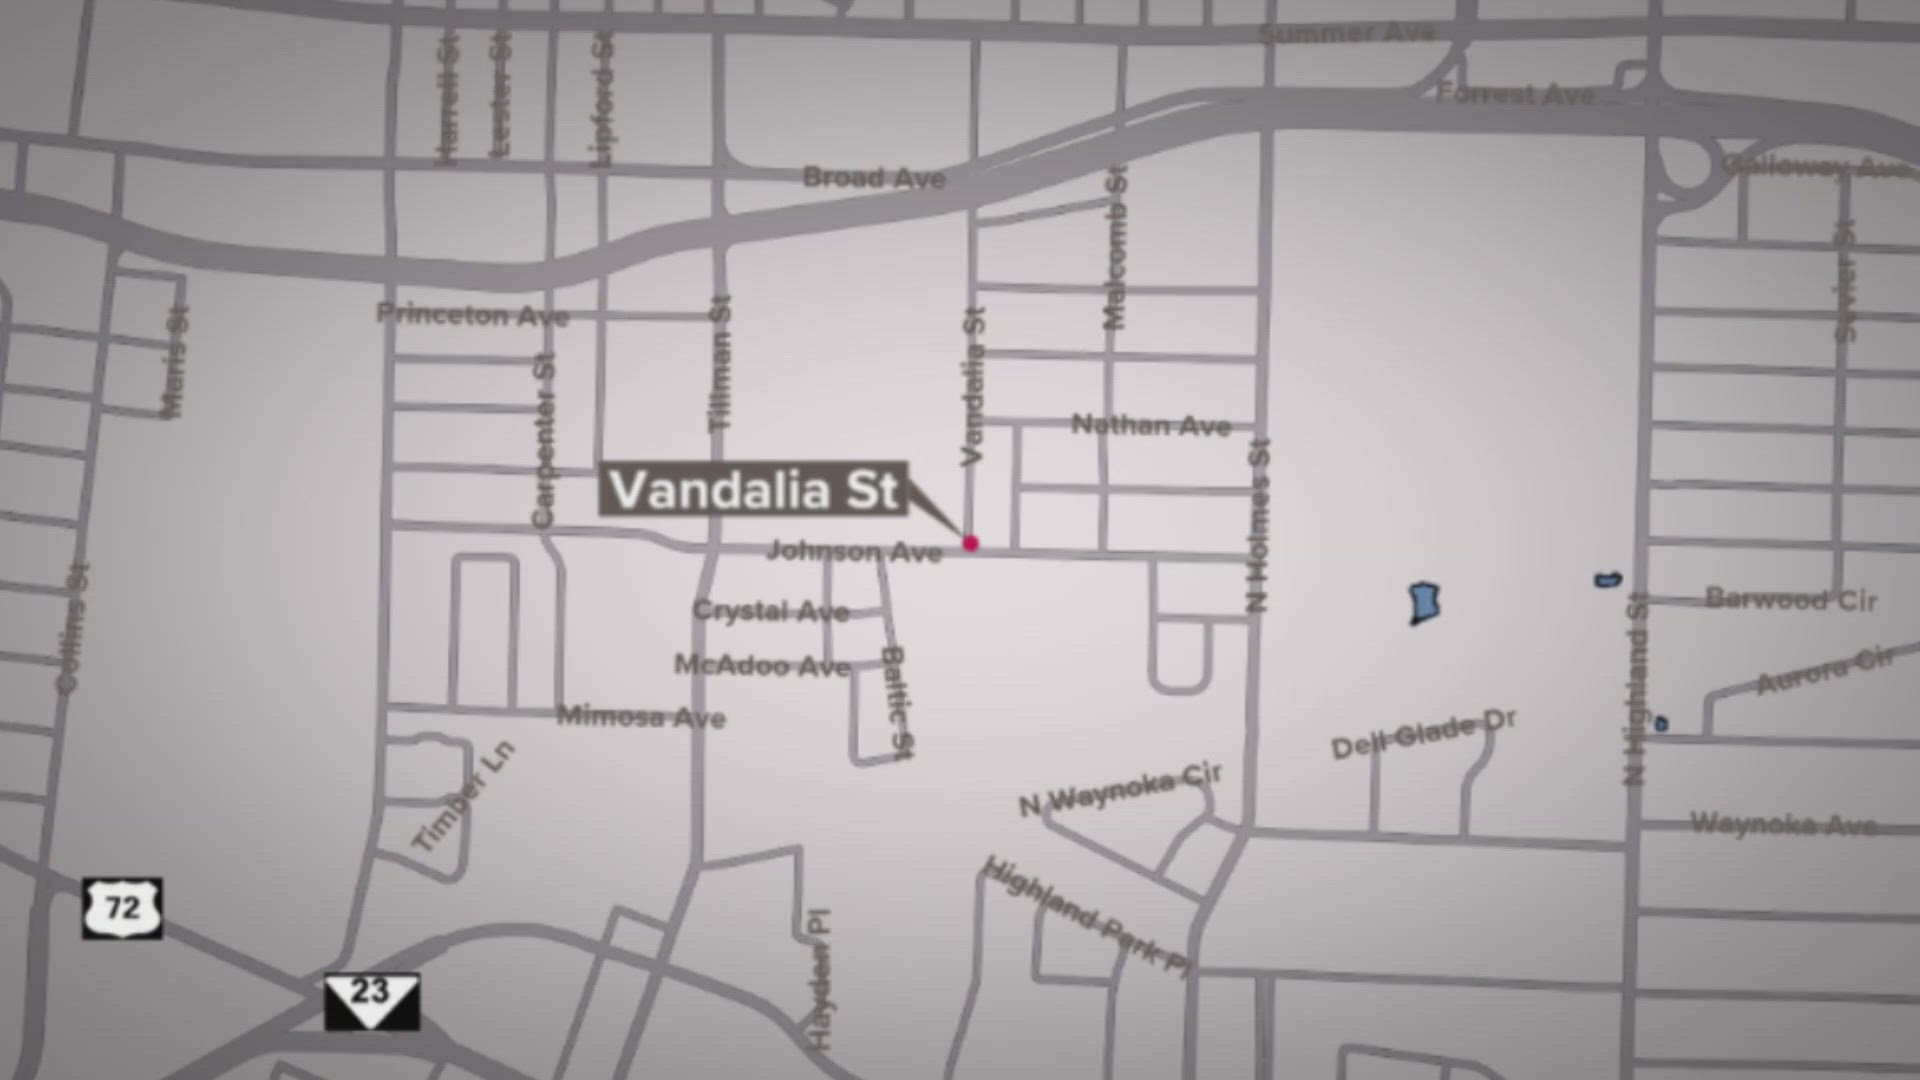 Police responded to the shooting Thursday around 2:15 a.m. in the 300 block of Vandalia Street.